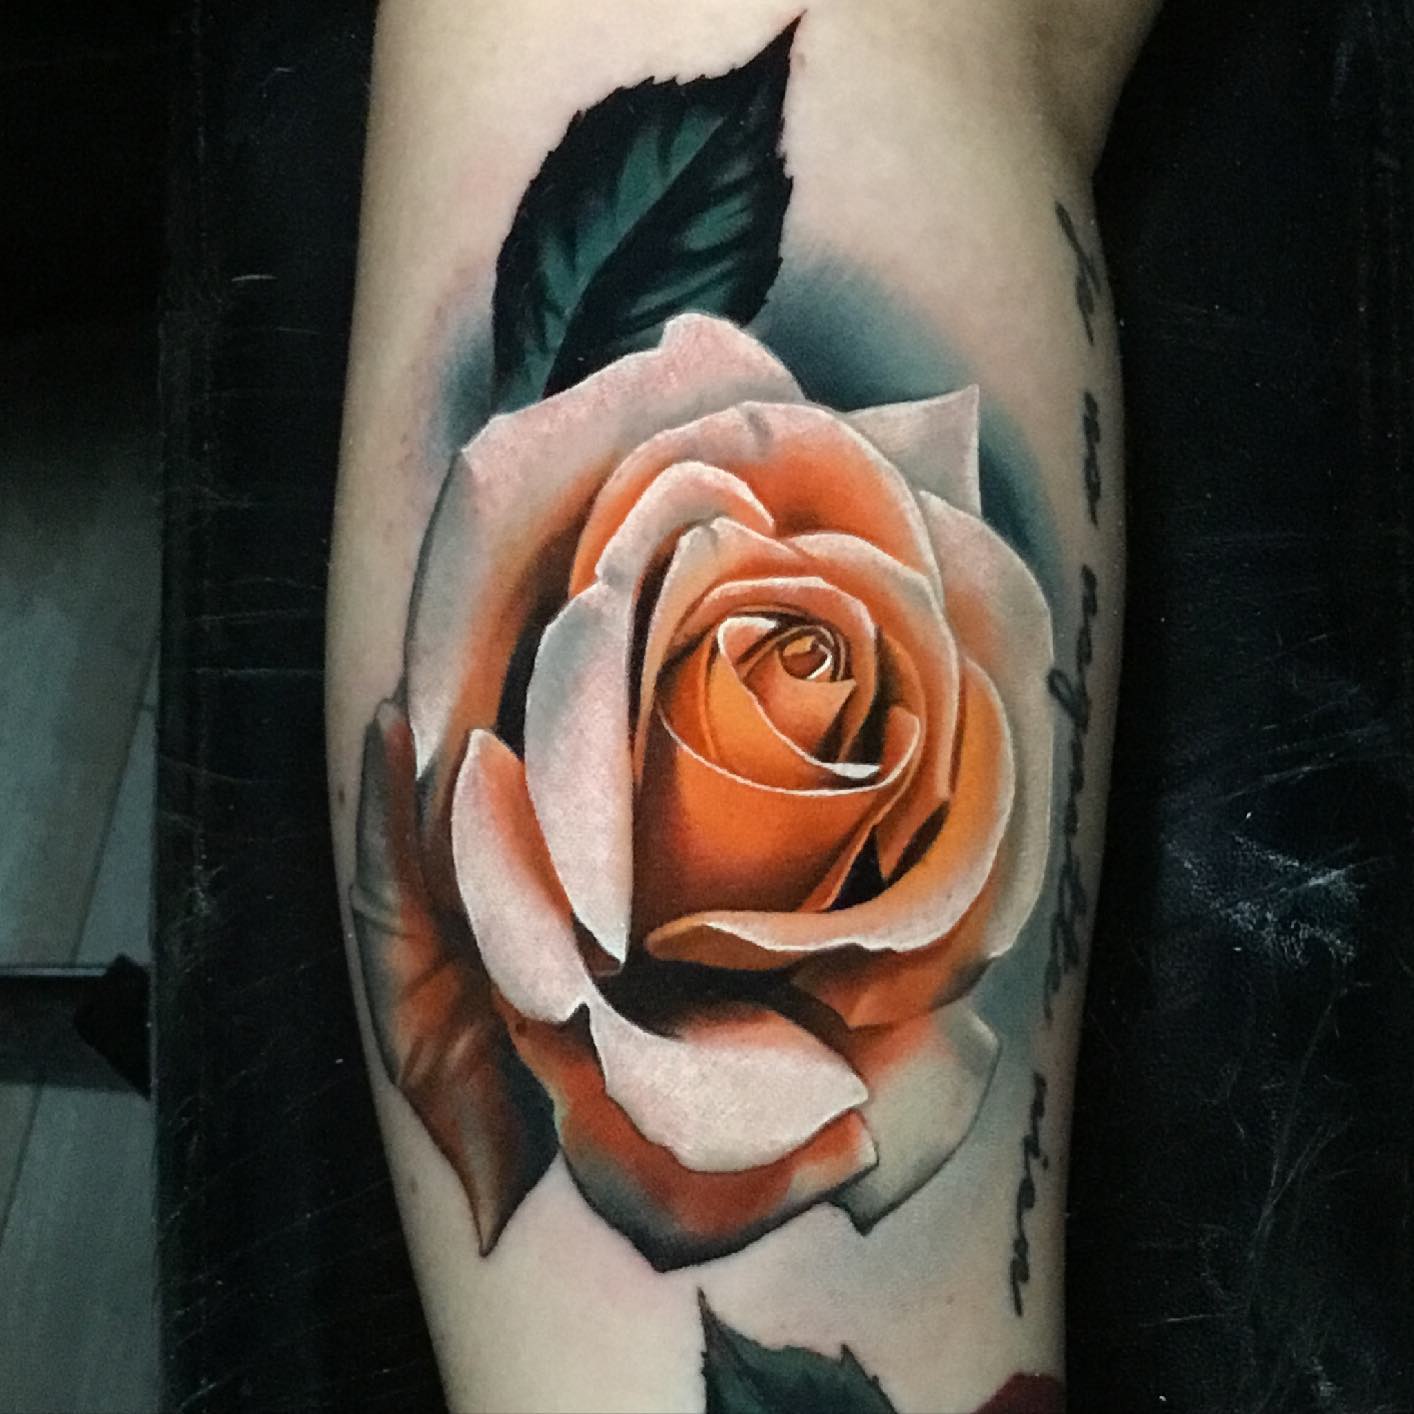 peach rose tattoo on a mans forearms